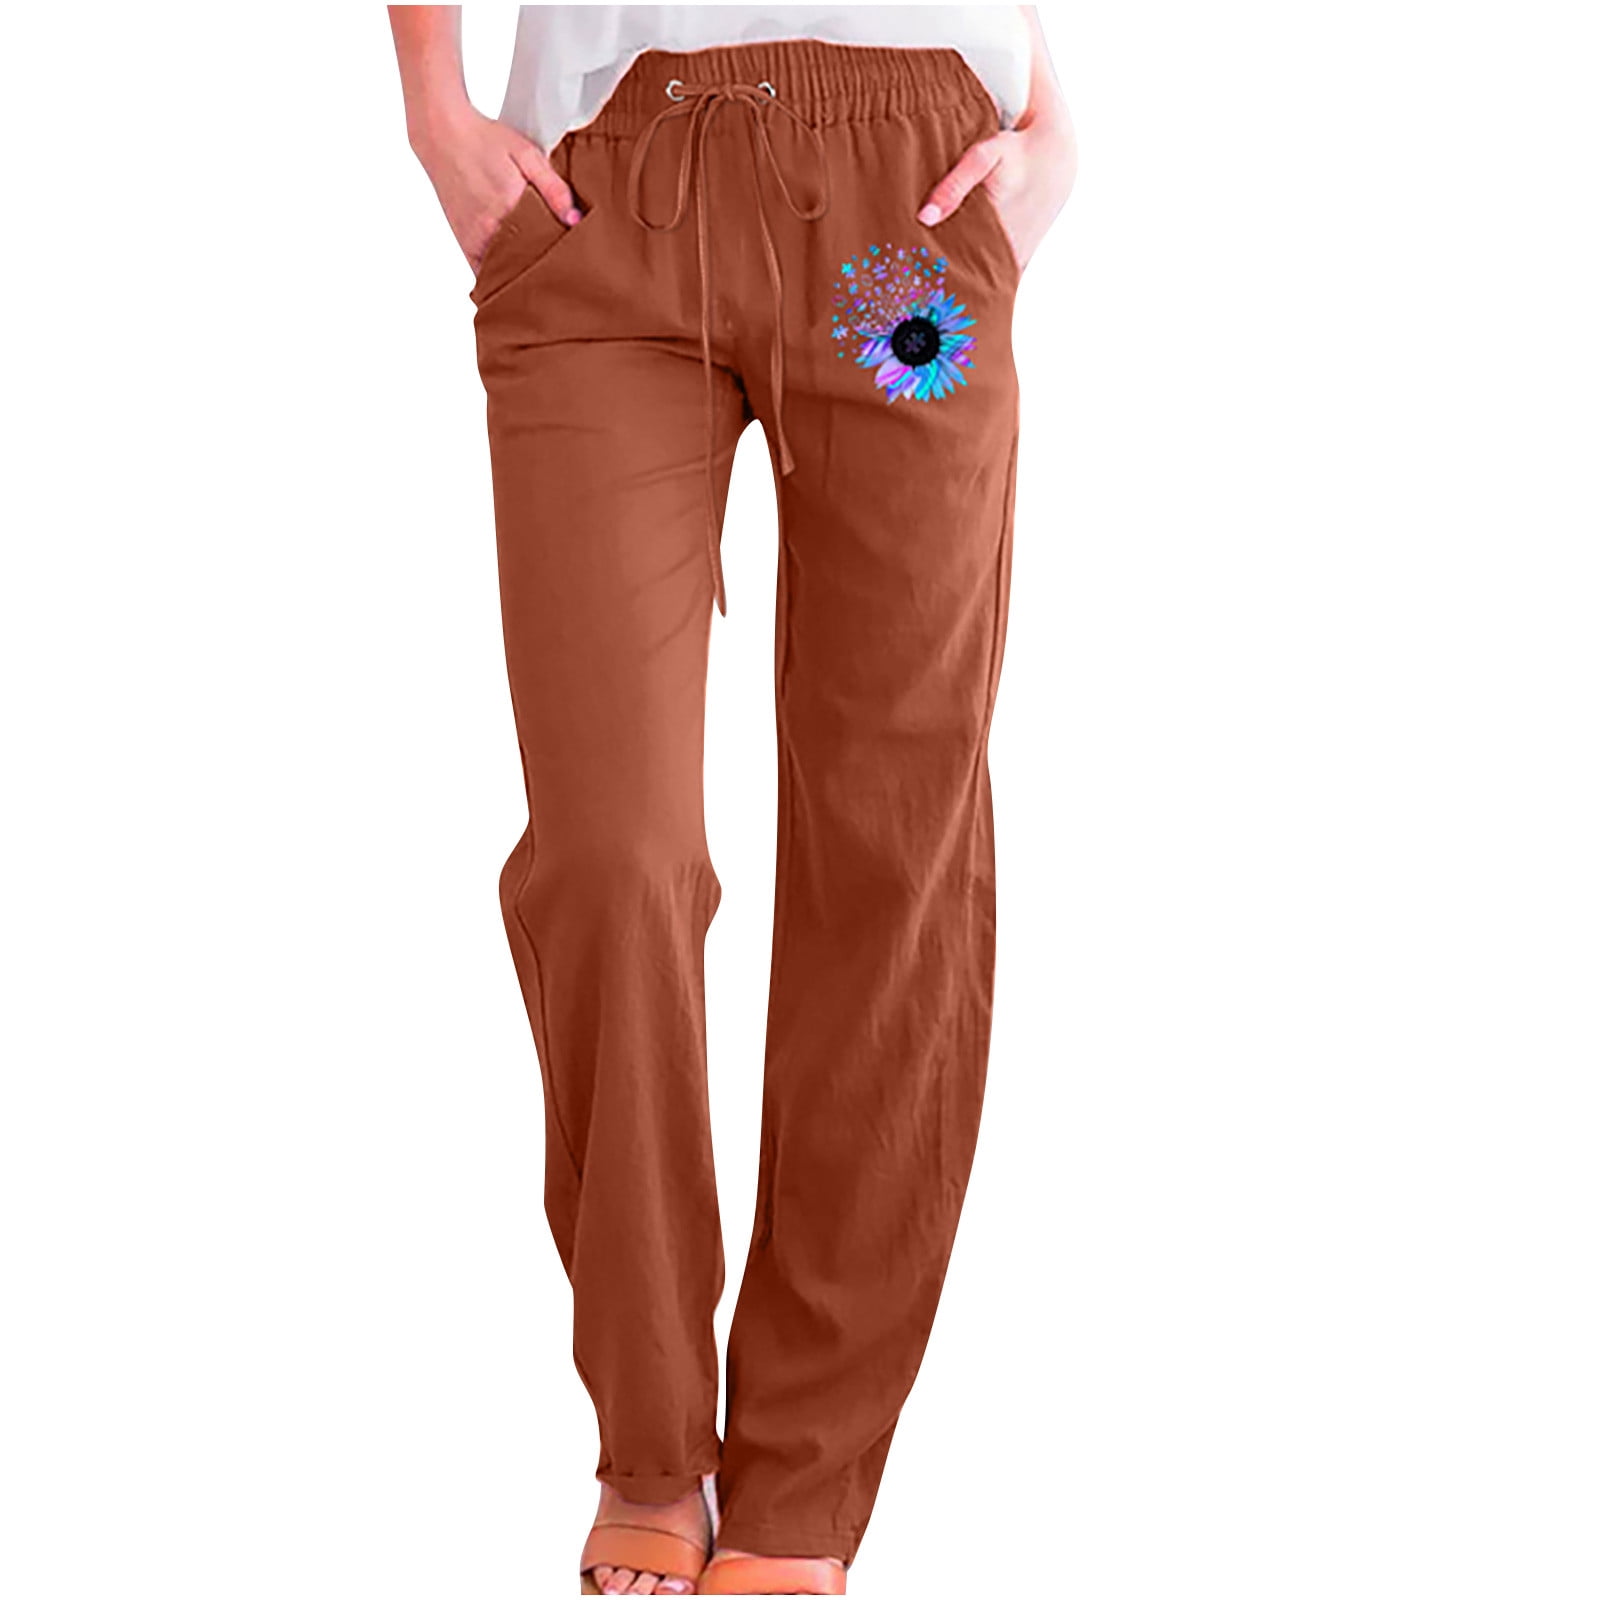 RESTOCK ADVENTUROUS PANTS NOW 40% OFF - NEW COLOR ADDED! - Kyodan